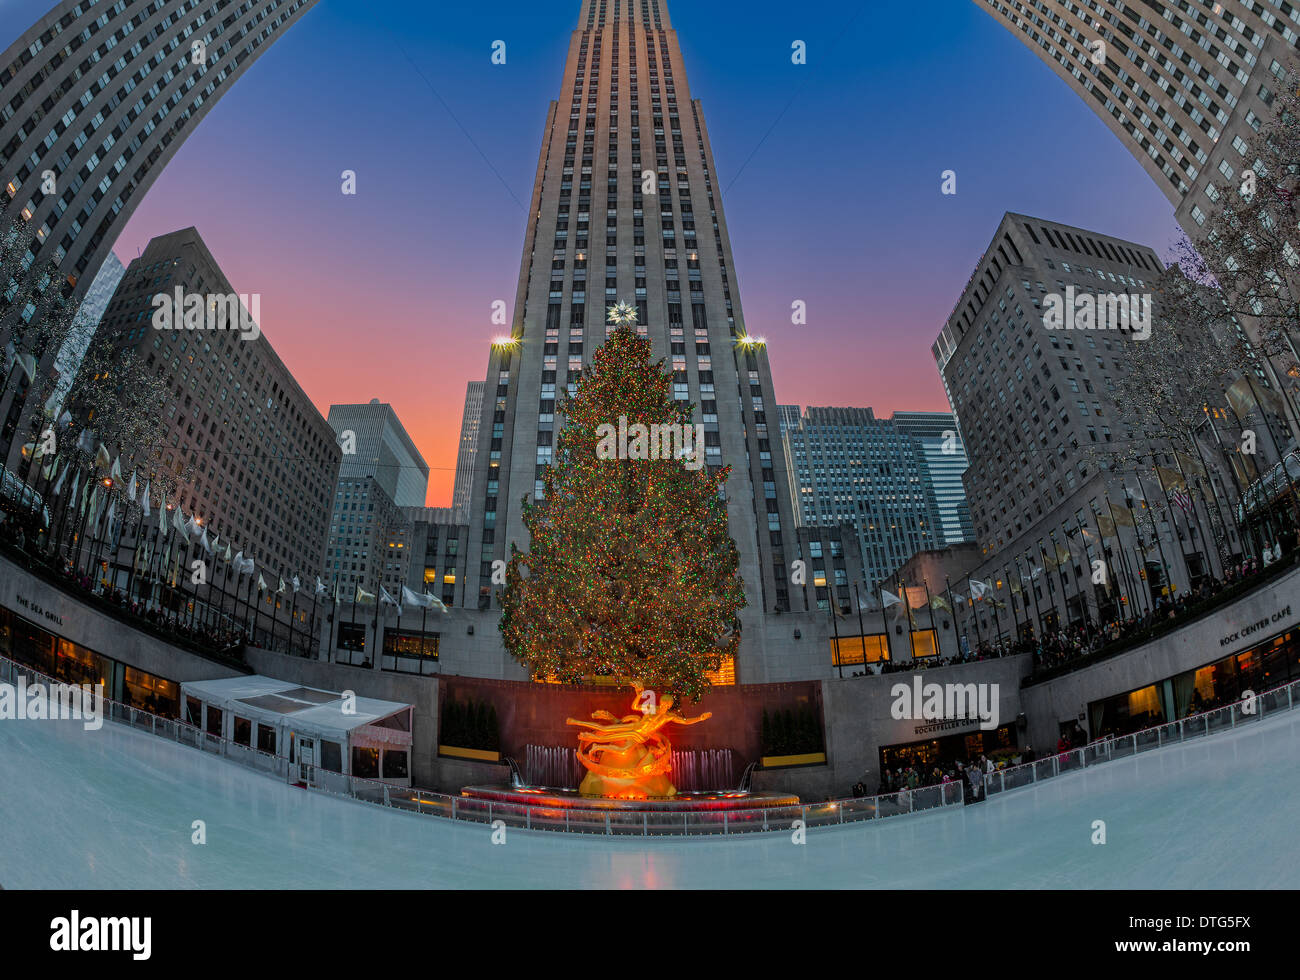 Rockefeller Center's lower plaza with the iconic adorned and illuminated Christmas tree and ice skating rink. Stock Photo